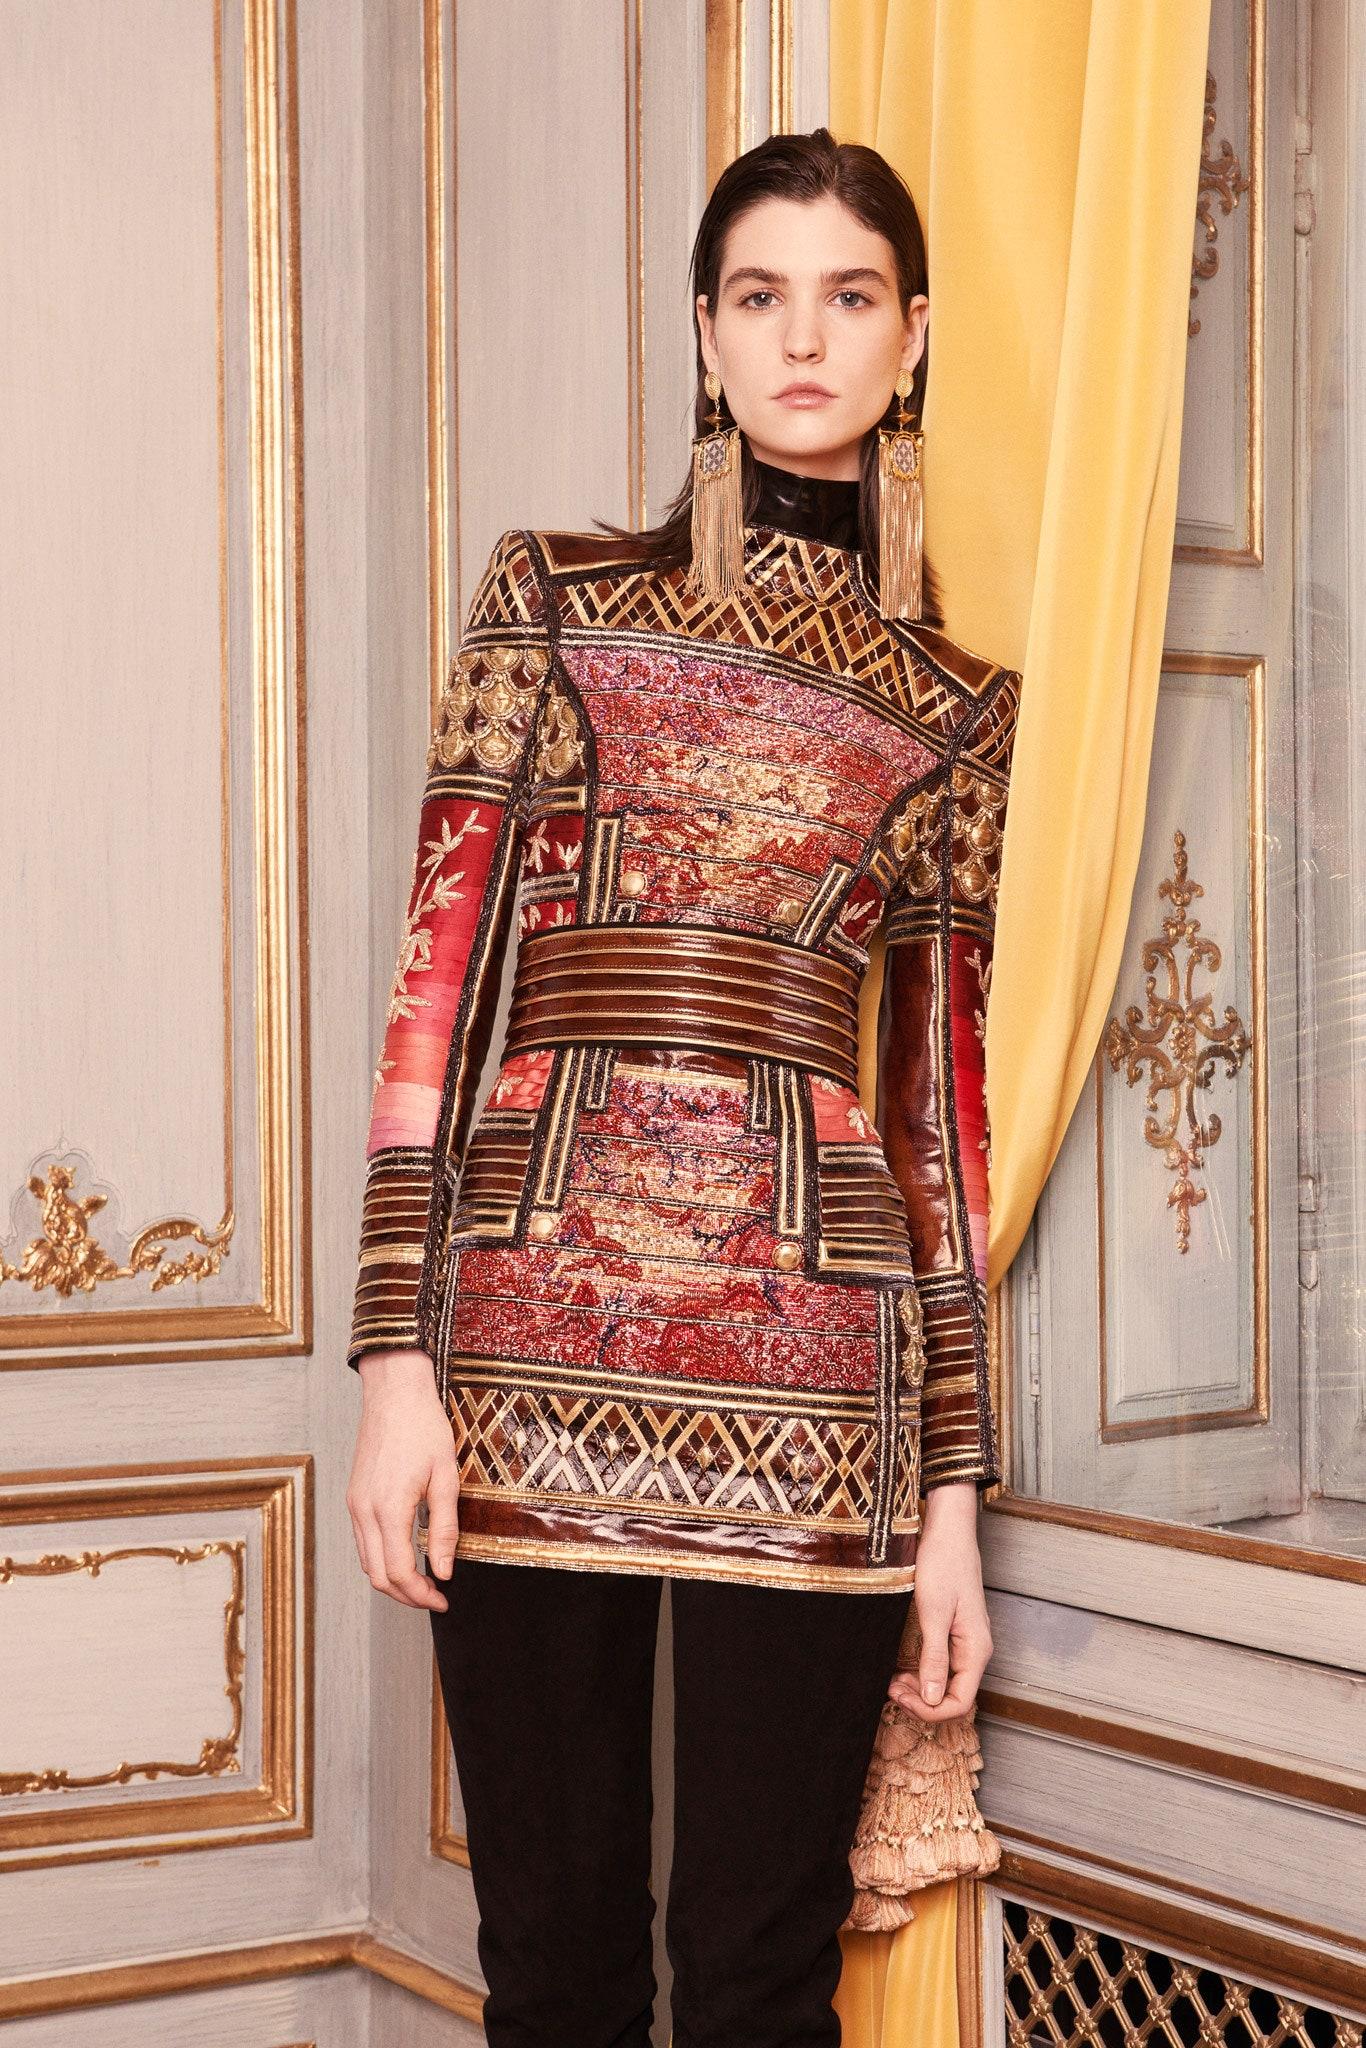 Balmain Pre-Fall 2013 Evening mini dress with golden patent leather inserts
Embellished with shiny fabric and gold lacquer accents

Inside the brand logo


Corset type according to the figure, adjustable with clasps at the back
with cups

With